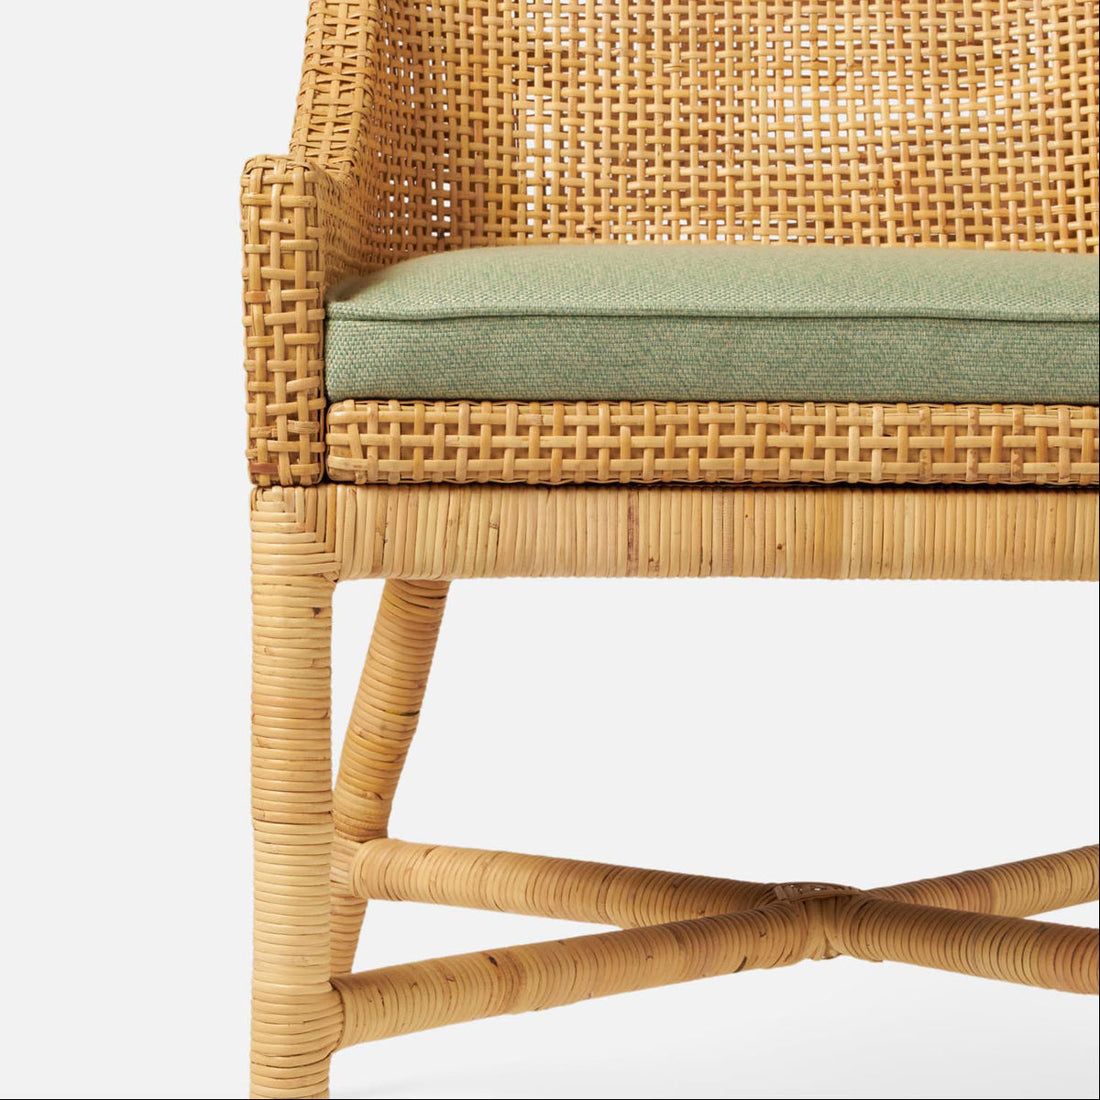 Made Goods Isla Woven Rattan Dining Chair in Ettrick Cotton Jute